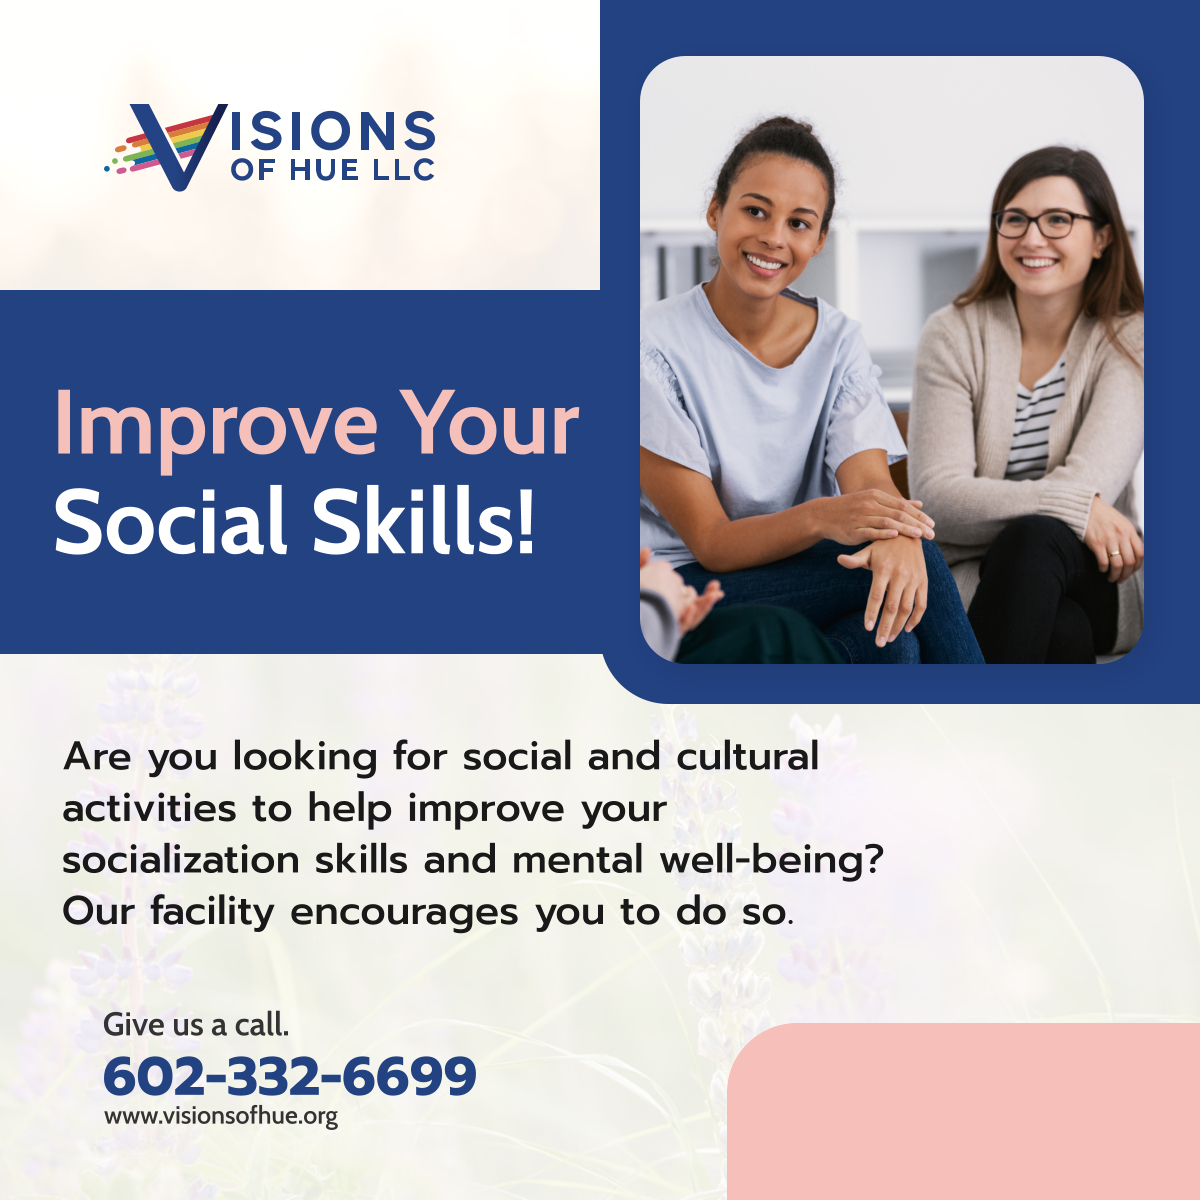 Our various program activities will expose you to different social citations, such as arts, photography, painting, movies, night parks, outings, and more. Get in touch with us today! 

#GoodyearAZ #SocialSkills #BehavioralResidentialTreatmentFacilities